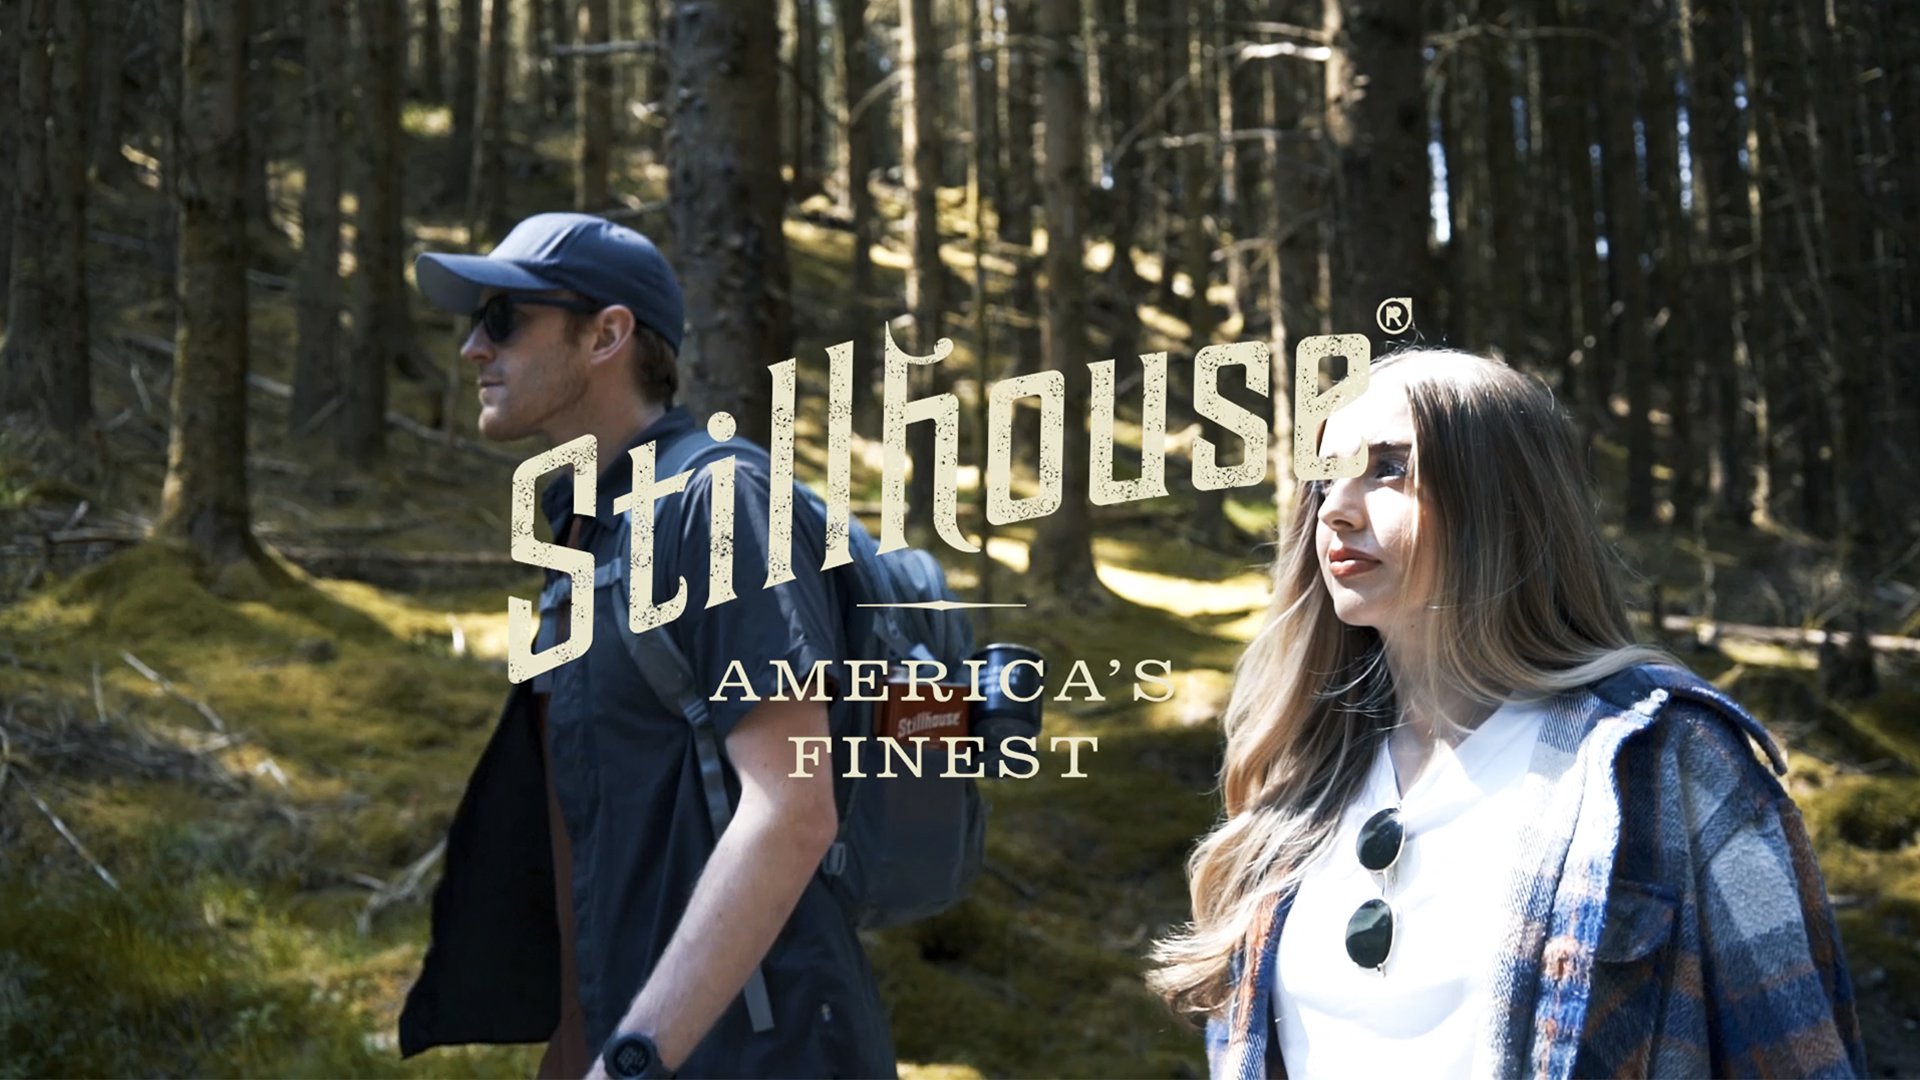 Find your next adventure with Stillhouse Whiskey’s WebAR experience